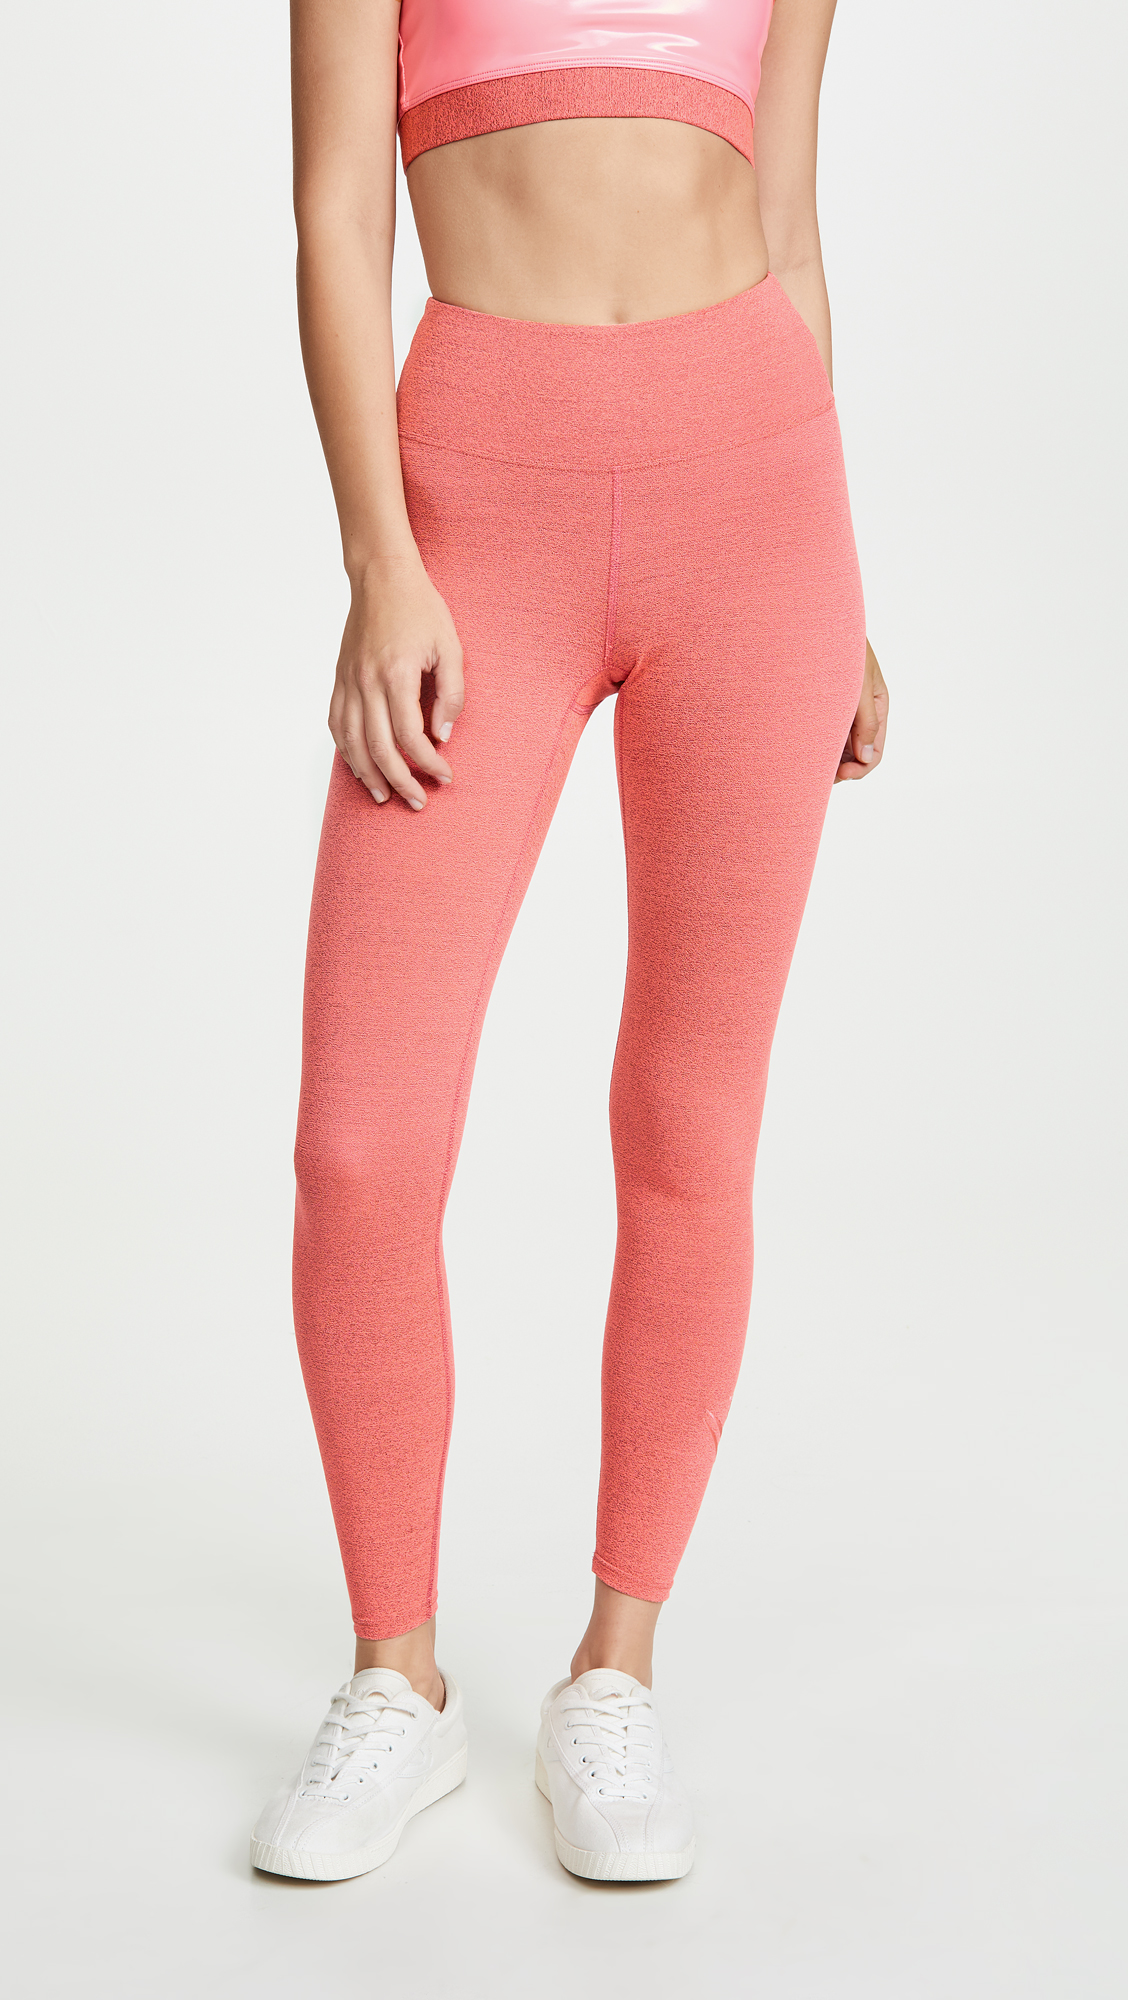 outfits with pink leggings